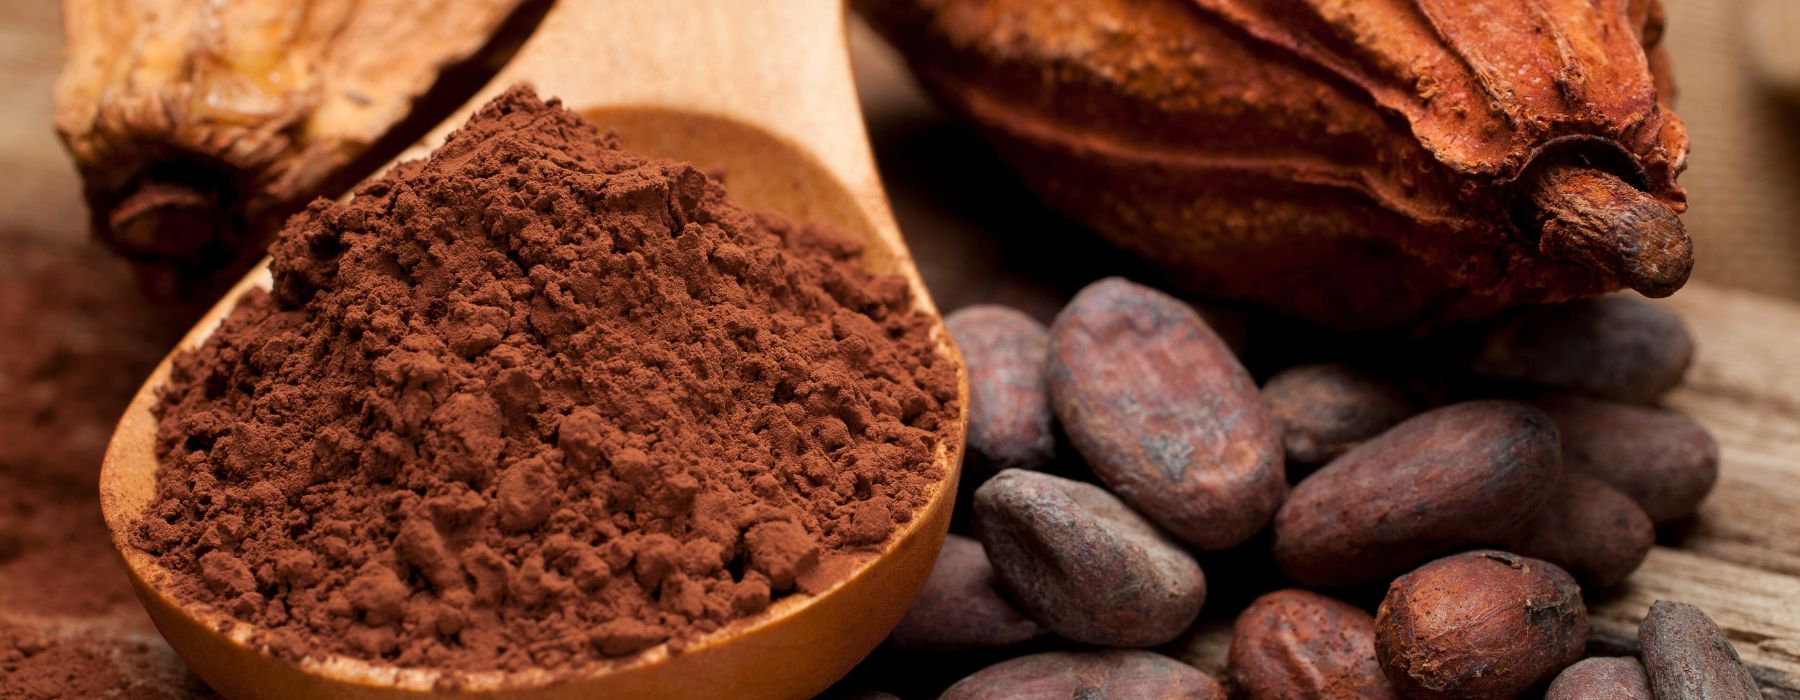 PERUVIAN CHOCOLATE: GUIDE FOR COCOA LOVERS